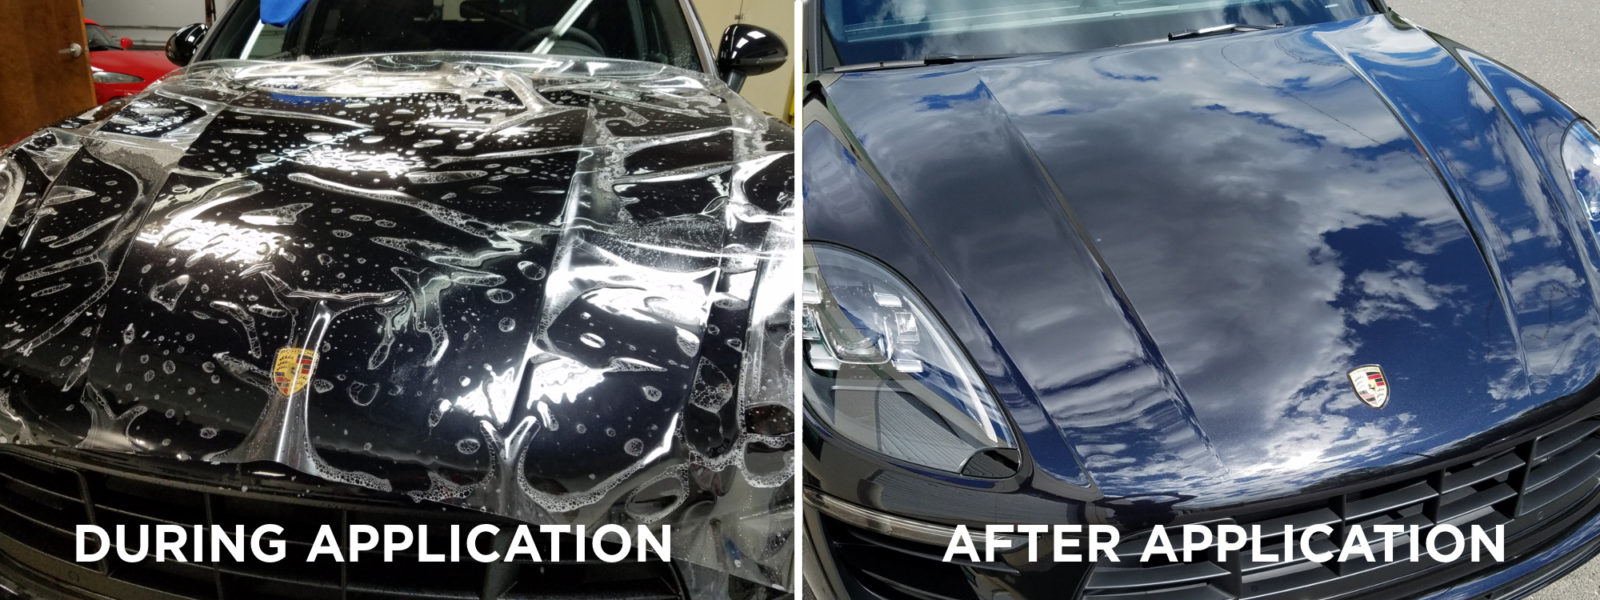 What You Should Know About Paint Protection Film (Clear Bra)